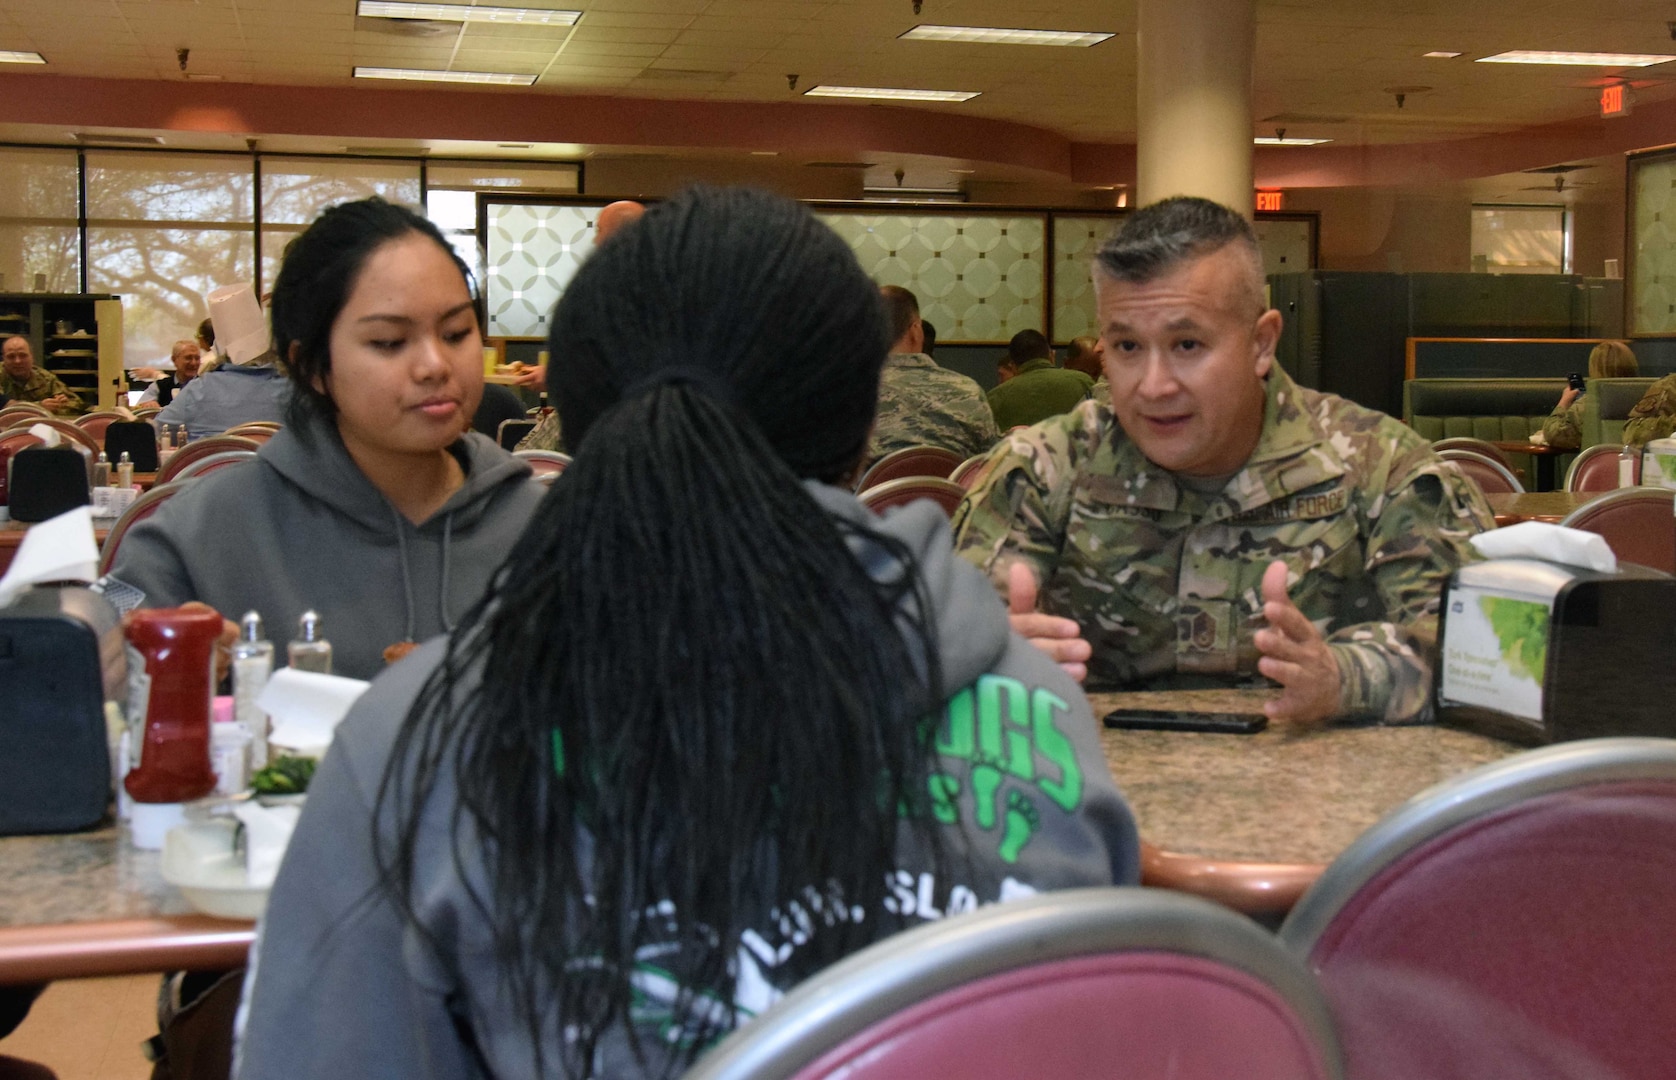 Chief Master Sgt. Miguel A. Casso, 356th Airlift Squadron chief loadmaster, visits with Airmen at the Serve the Airmen event Dec. 7, 2019 at the Live Oak Dining Facility on Joint Base San Antonio-Lackland, Texas.